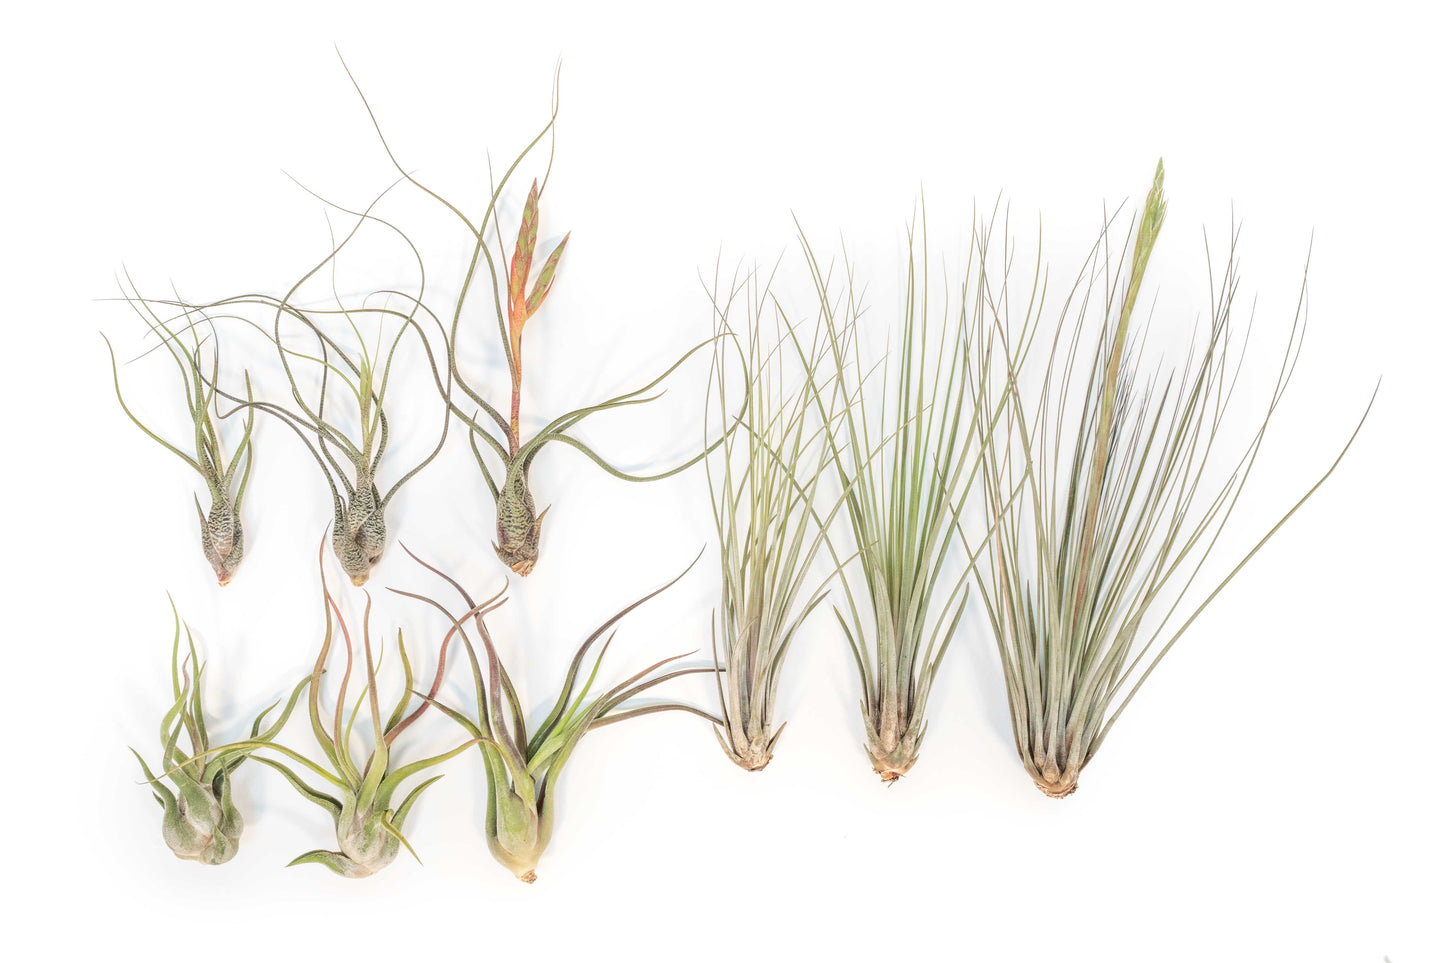 SALE - Long & Lovely Collection of Tillandsia Air Plants - Set of 9 or 18 - 50% Off